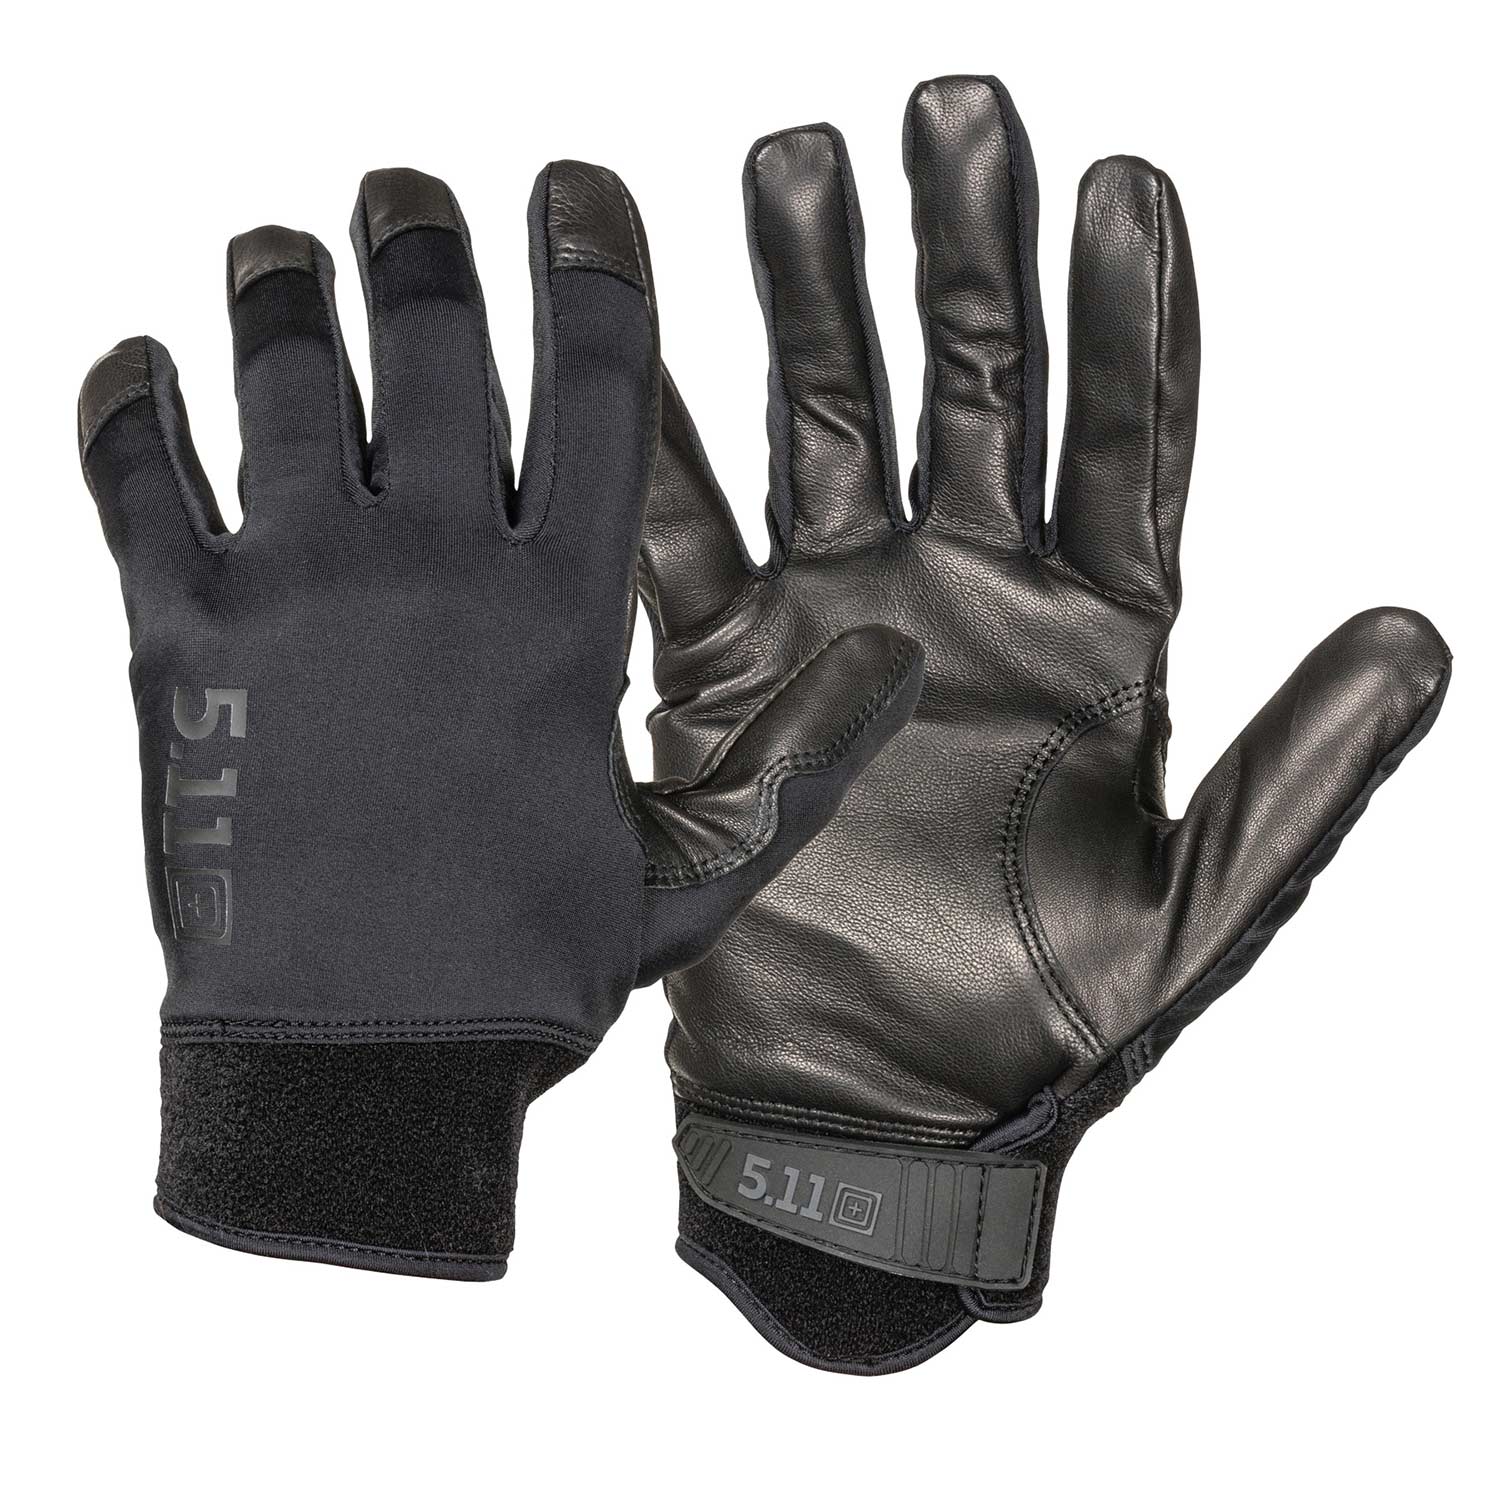 5 11 Tactical Gloves Size Chart